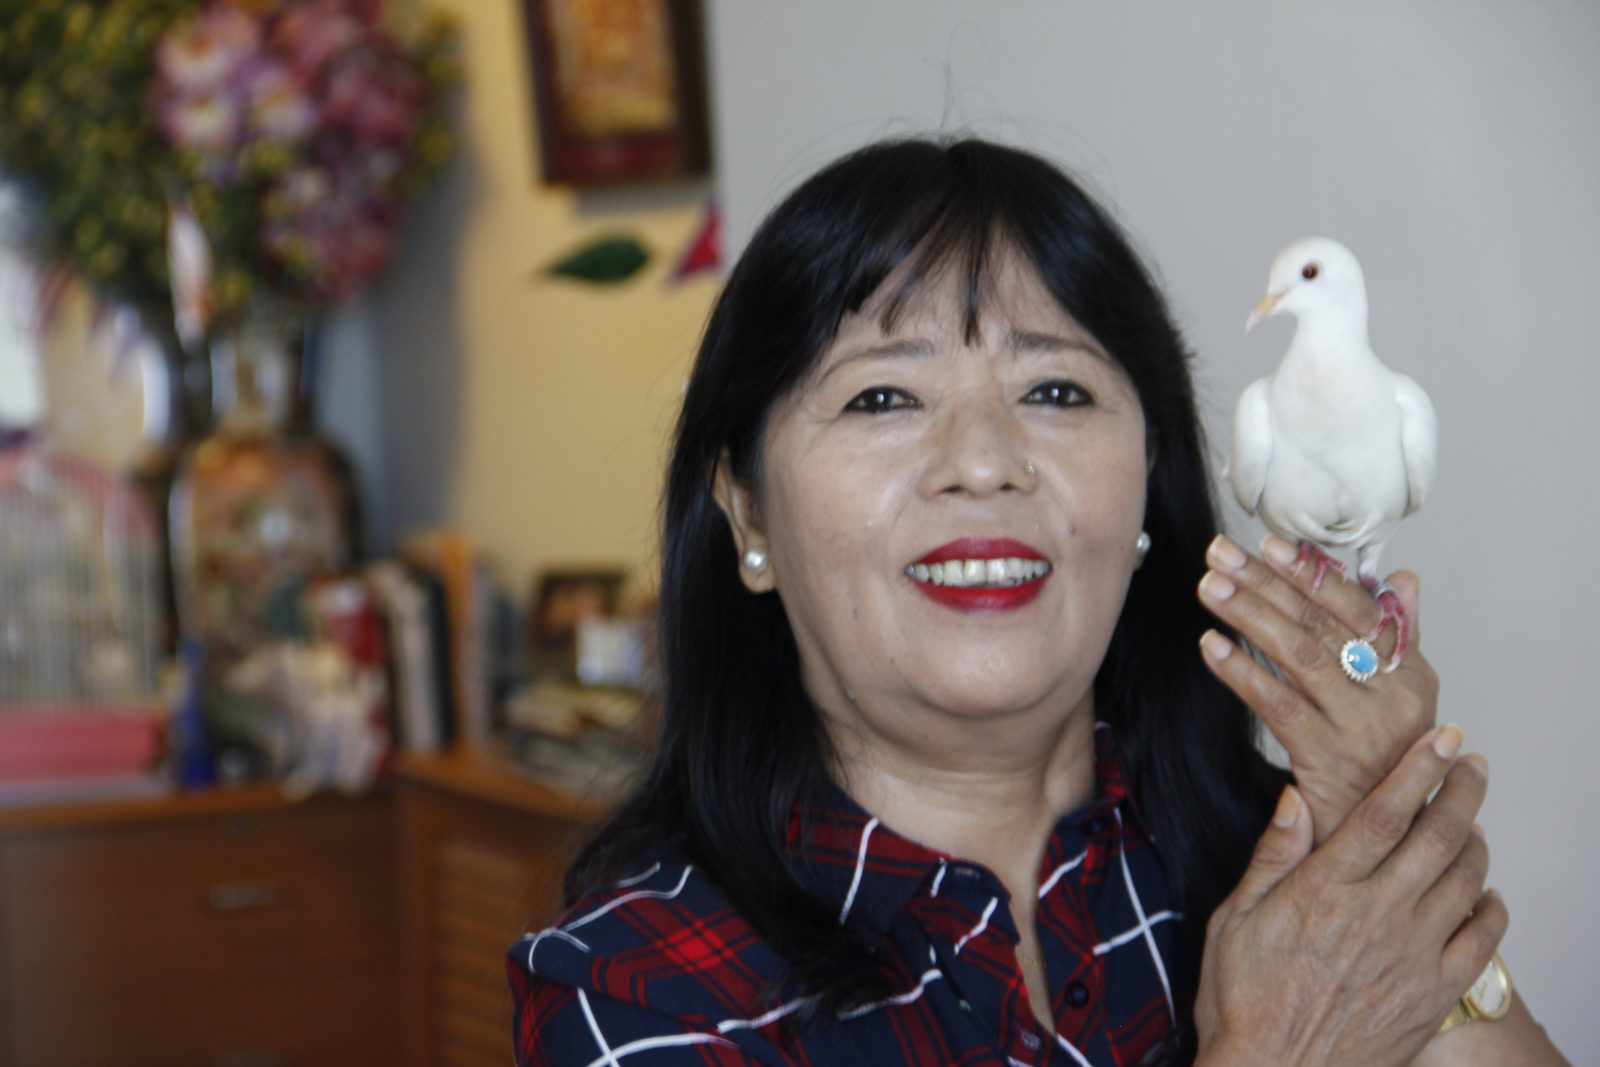 A photo of a woman posing with a bird in her hands